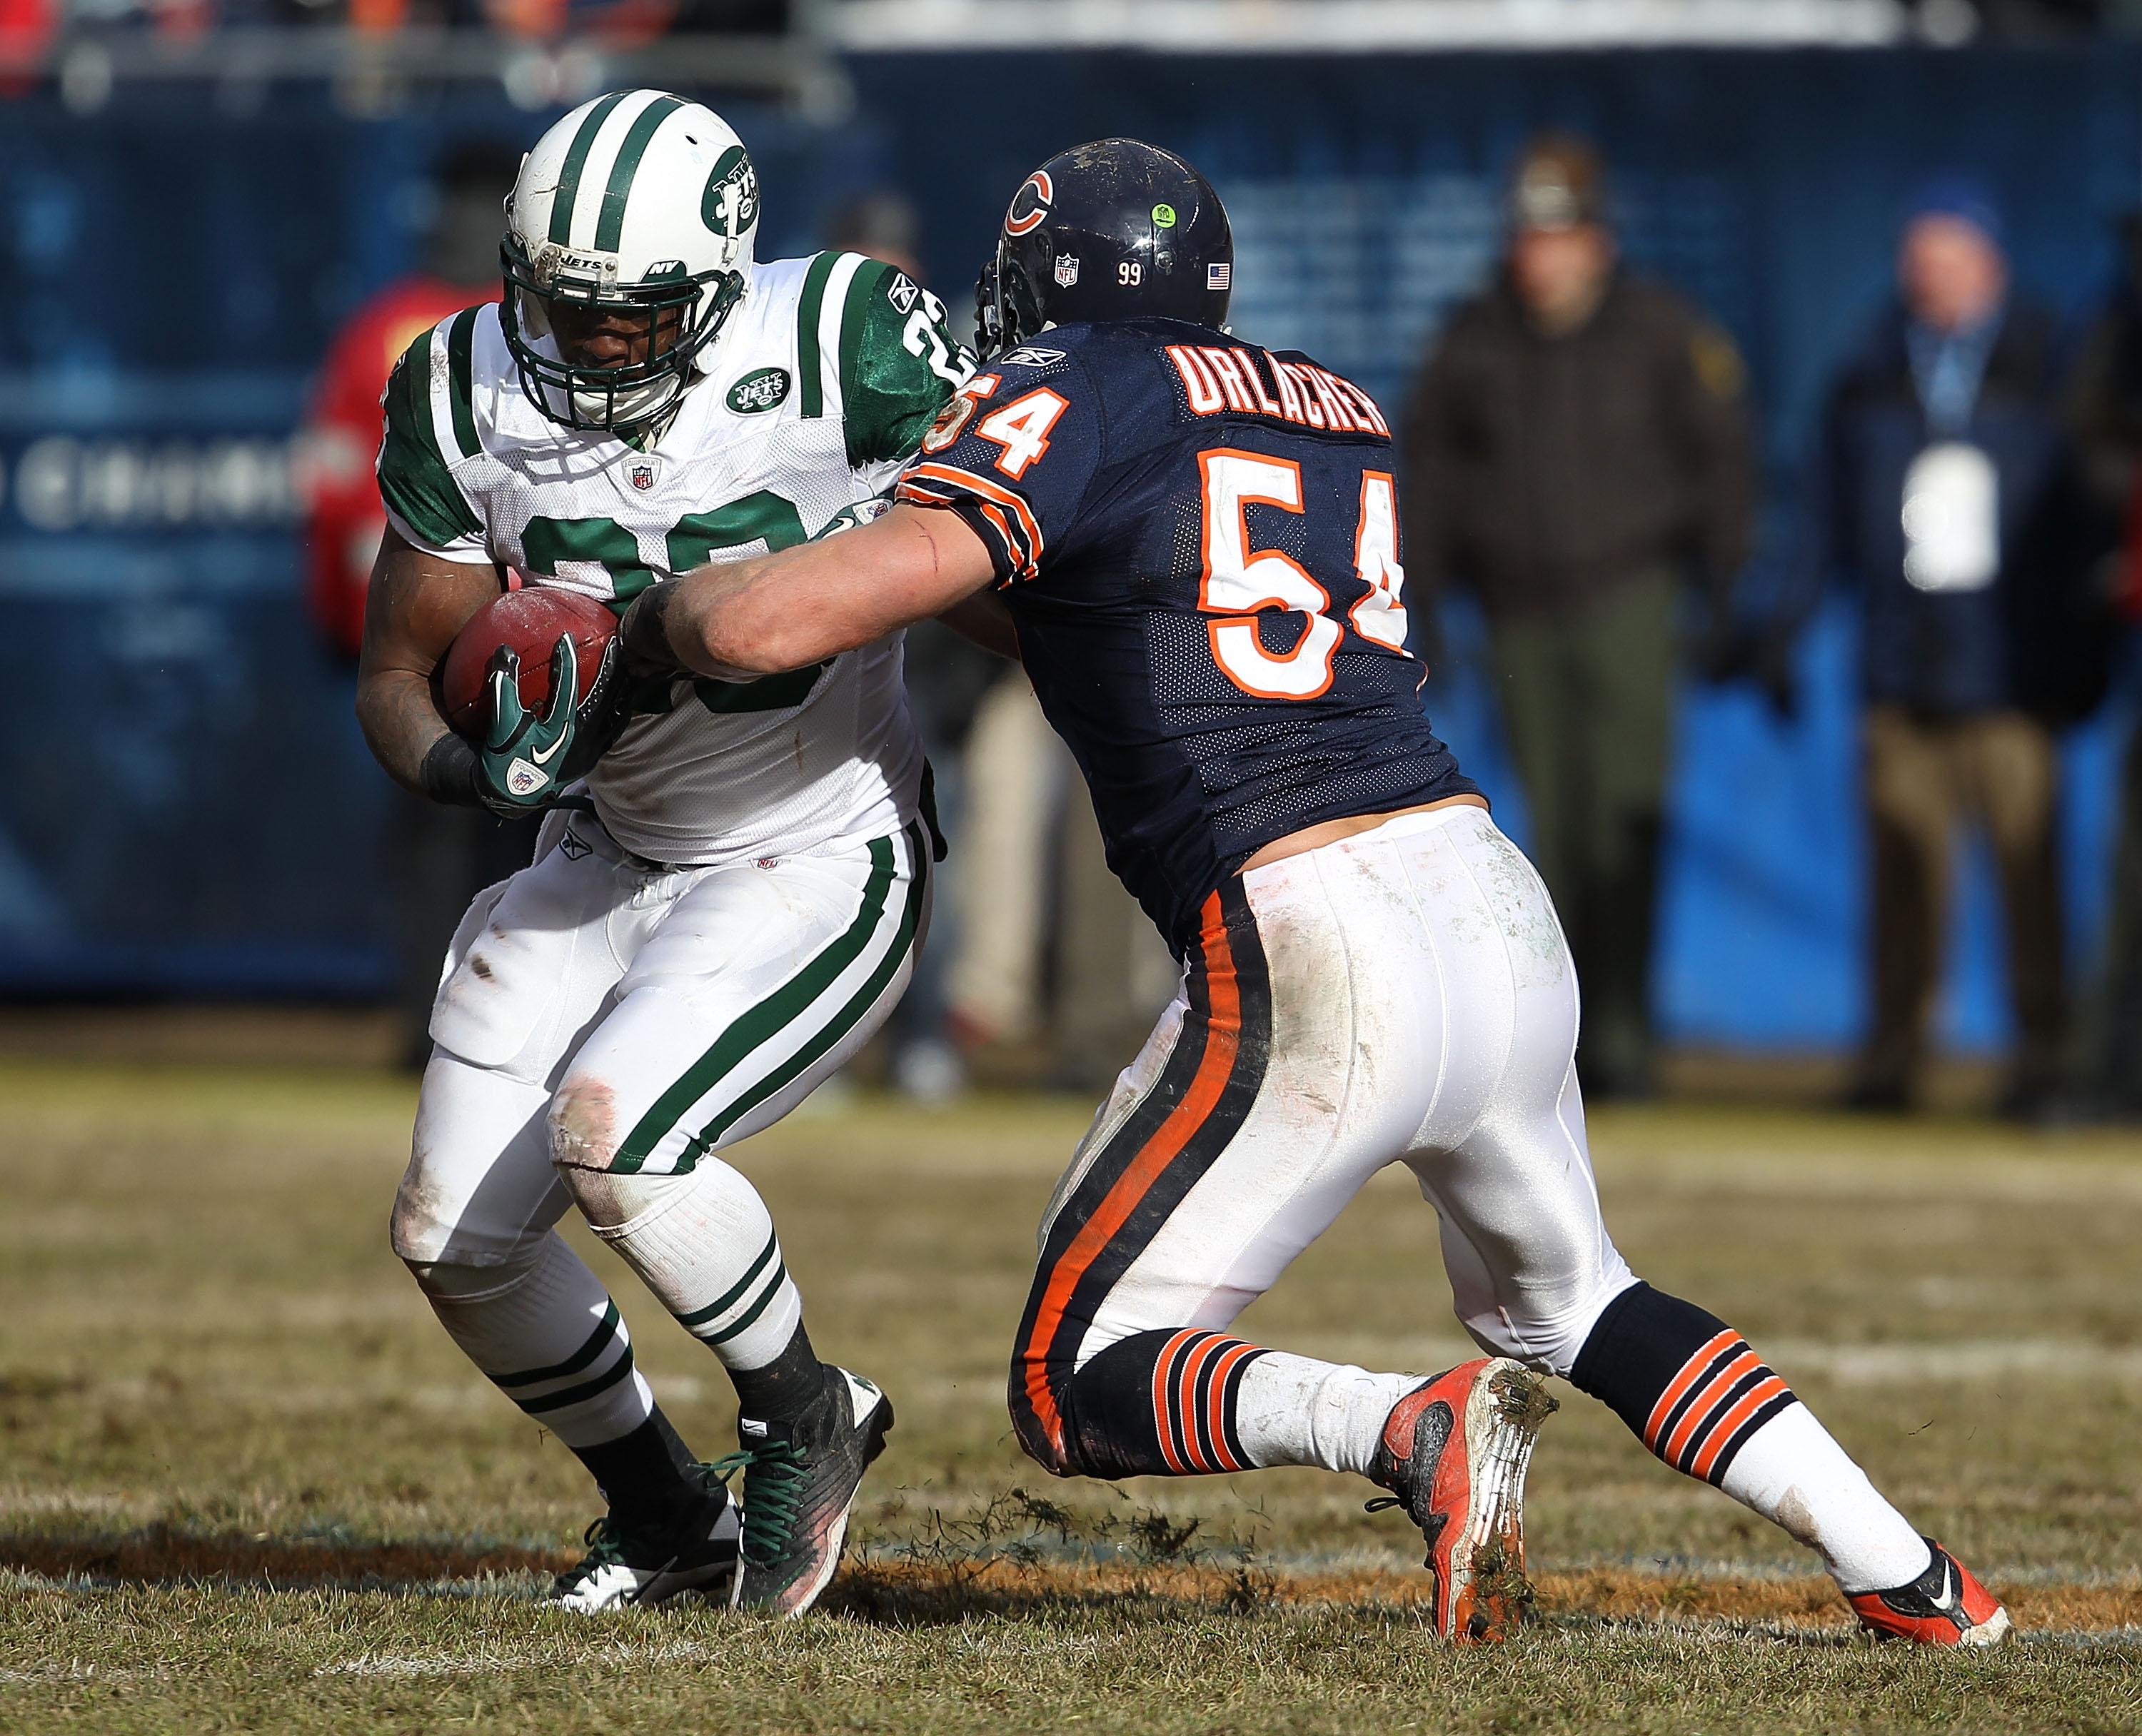 CHICAGO, IL - DECEMBER 26: Brian Urlacher #54 of the Chicago Bears brings down Shonn Greene #23 the New York Jets at Soldier Field on December 26, 2010 in Chicago, Illinois. The Bears defeated the Jets 38-34. (Photo by Jonathan Daniel/Getty Images)